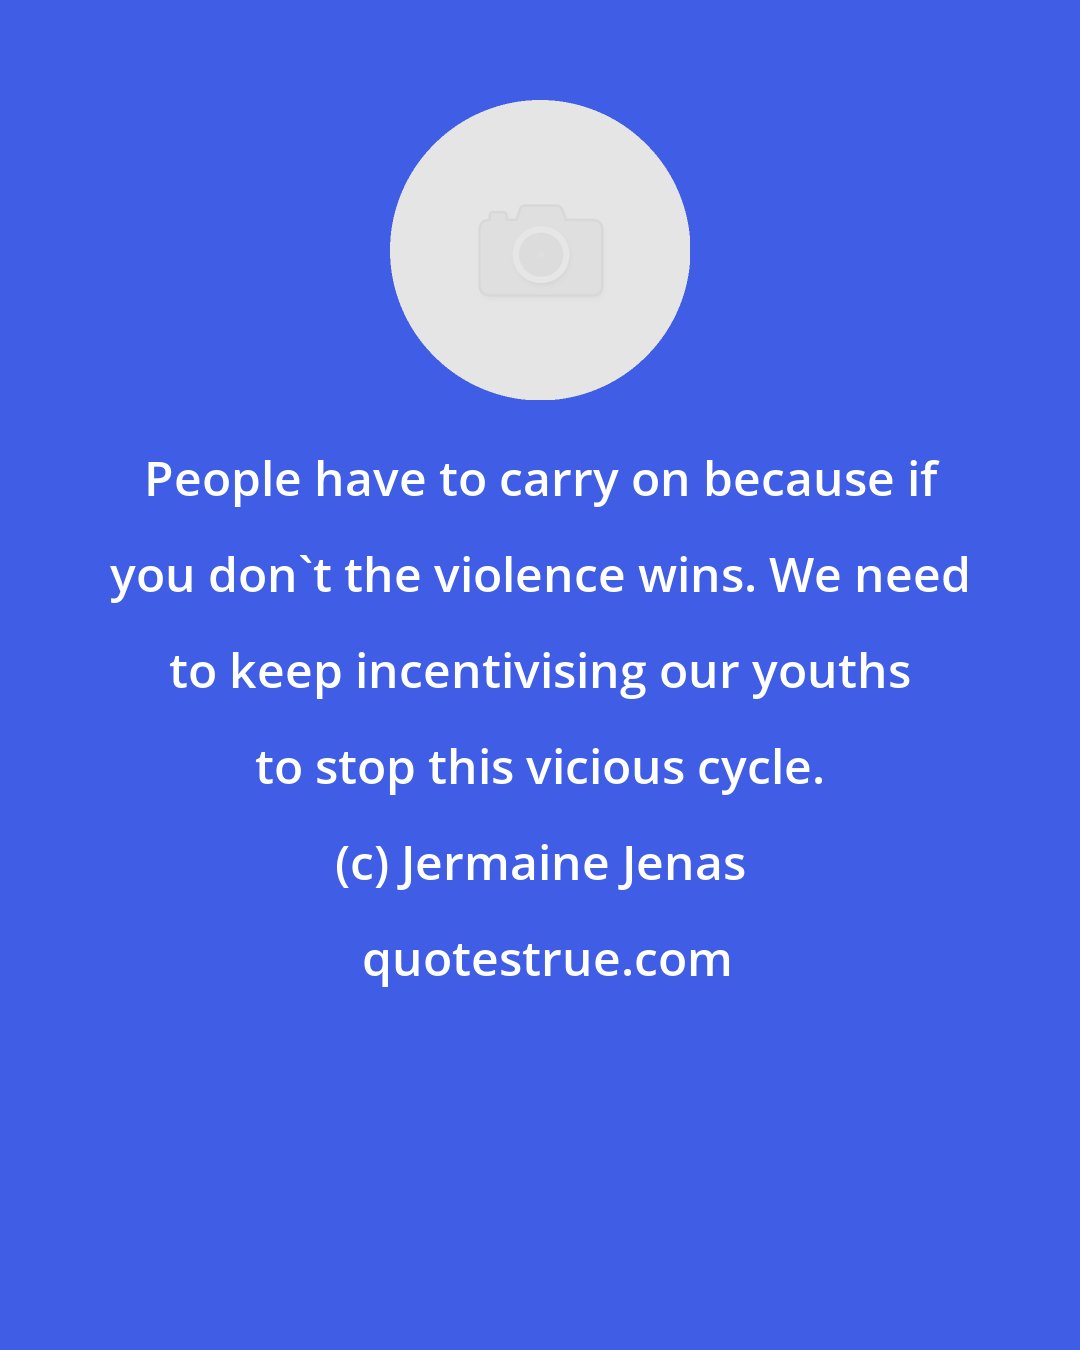 Jermaine Jenas: People have to carry on because if you don't the violence wins. We need to keep incentivising our youths to stop this vicious cycle.